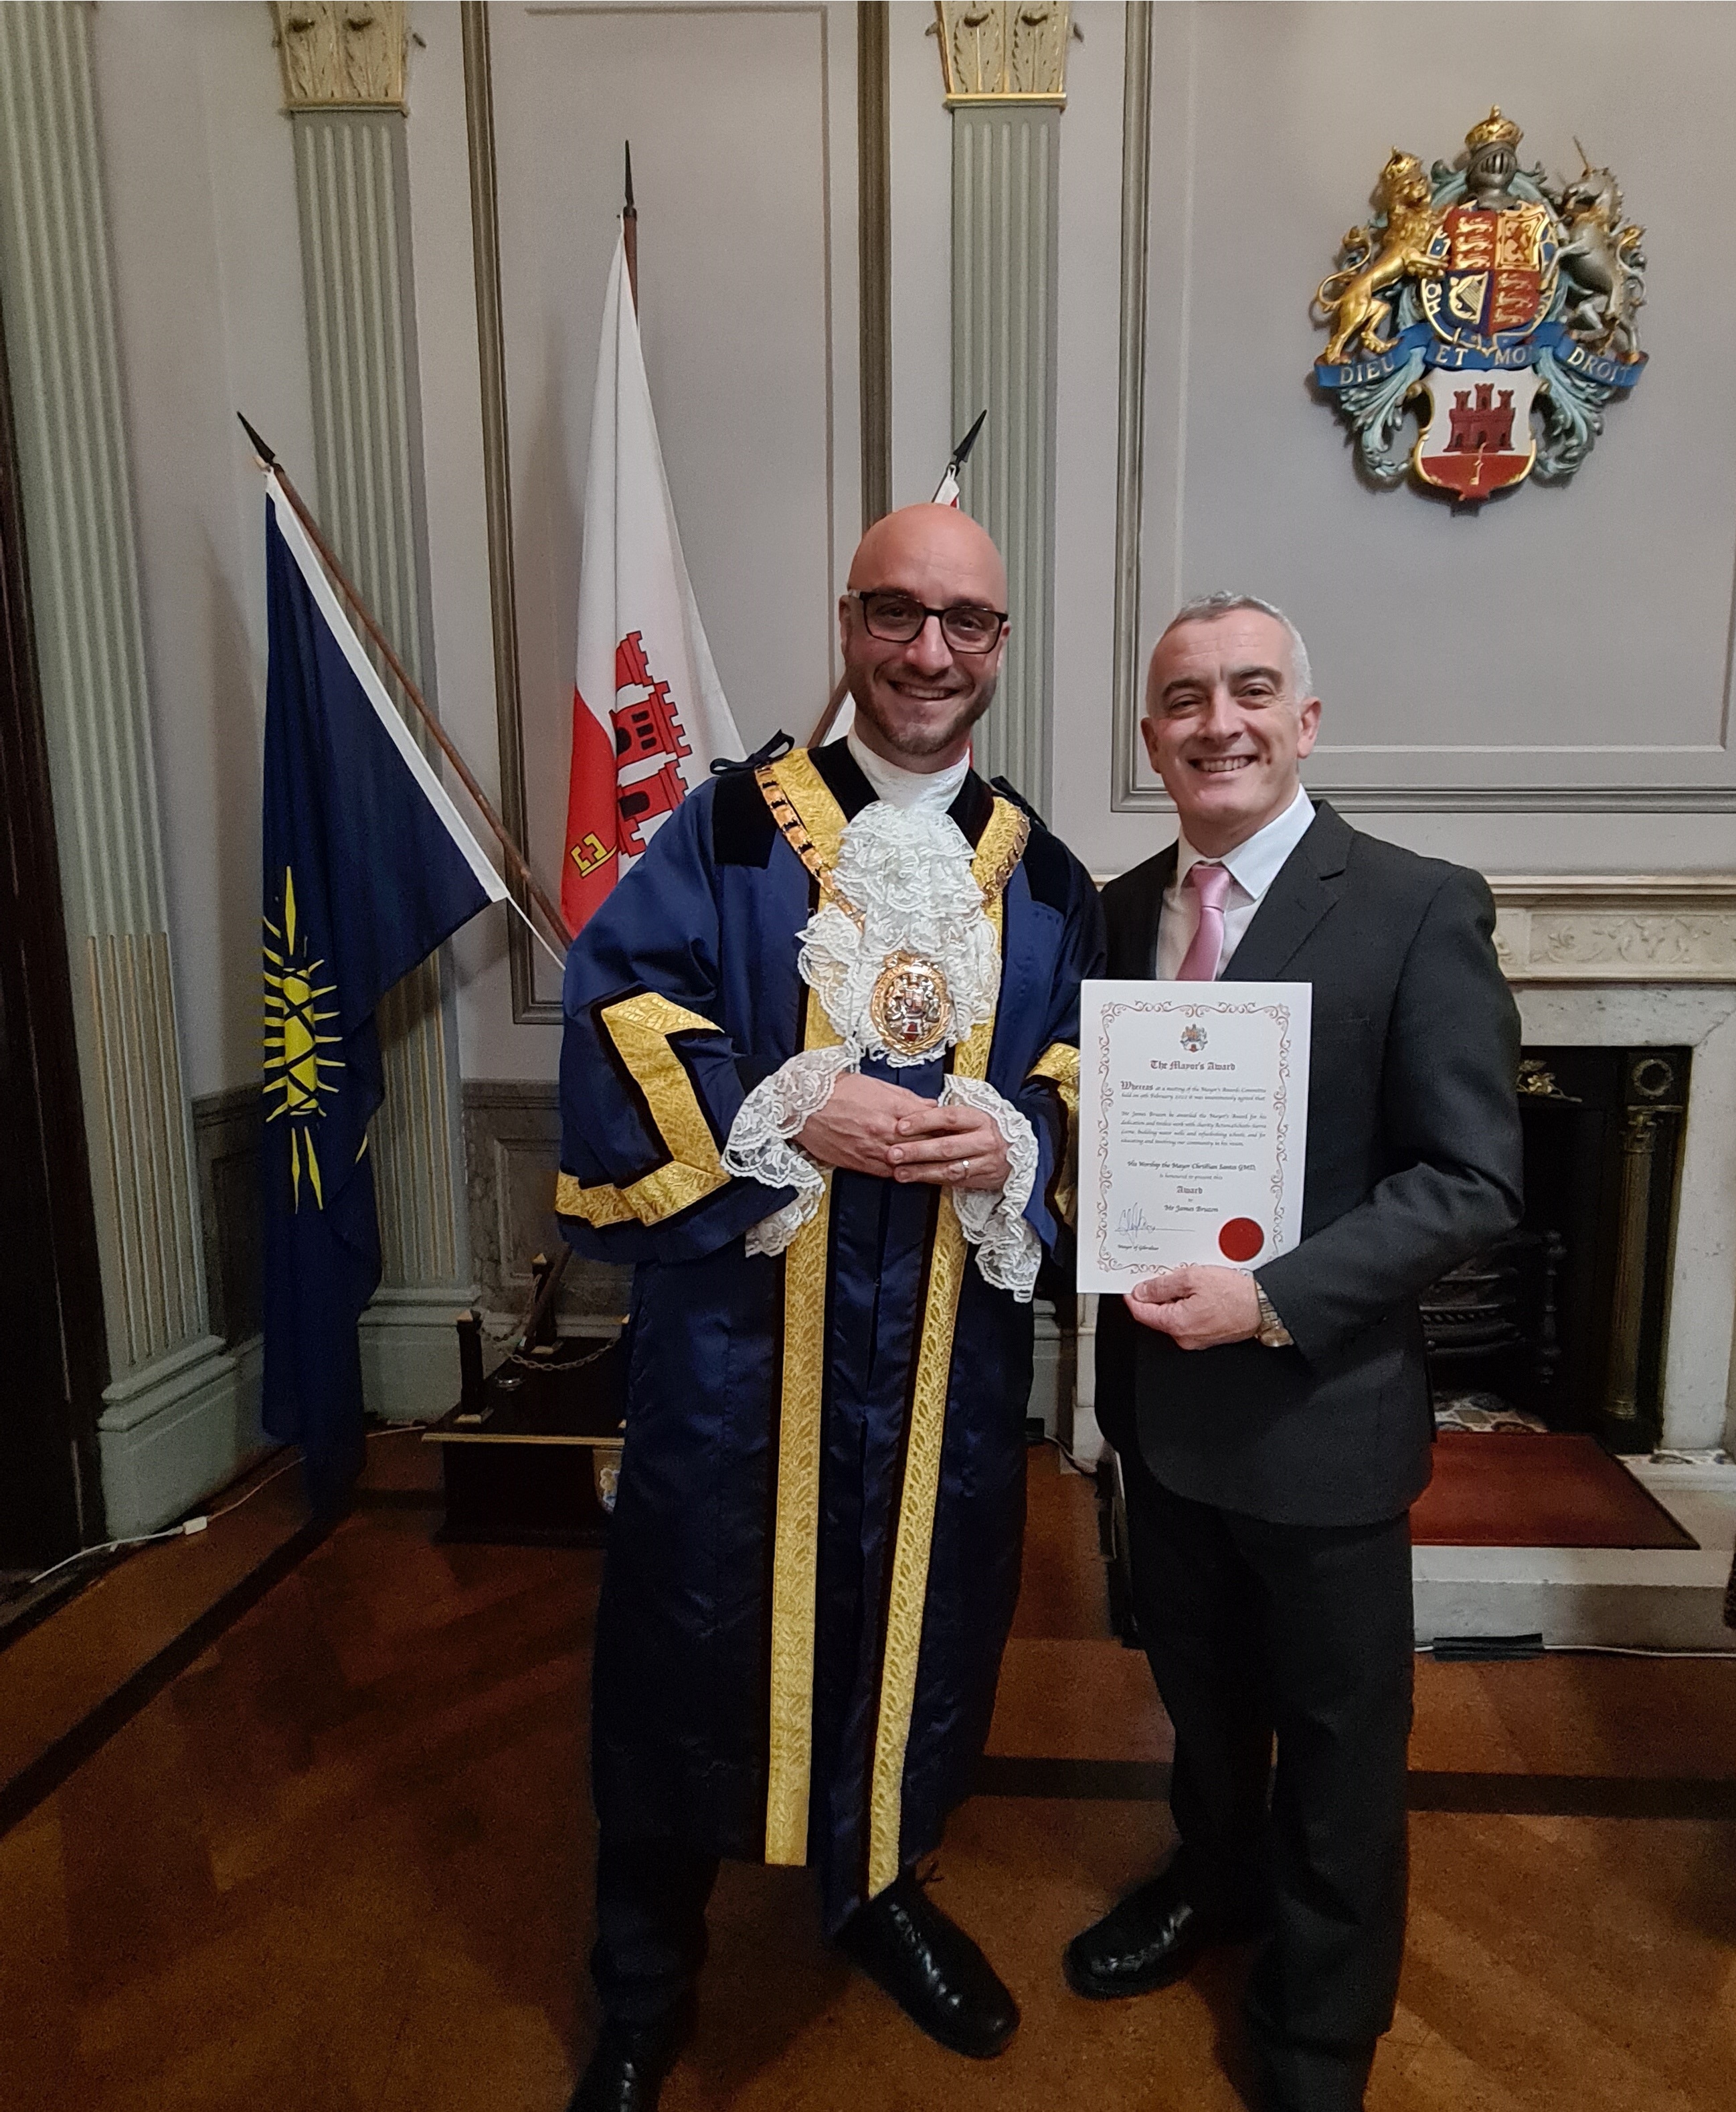 Mayor's Awards Ceremony 5th April 2022 - an honour and privilige to have been conferred an award - thank you !